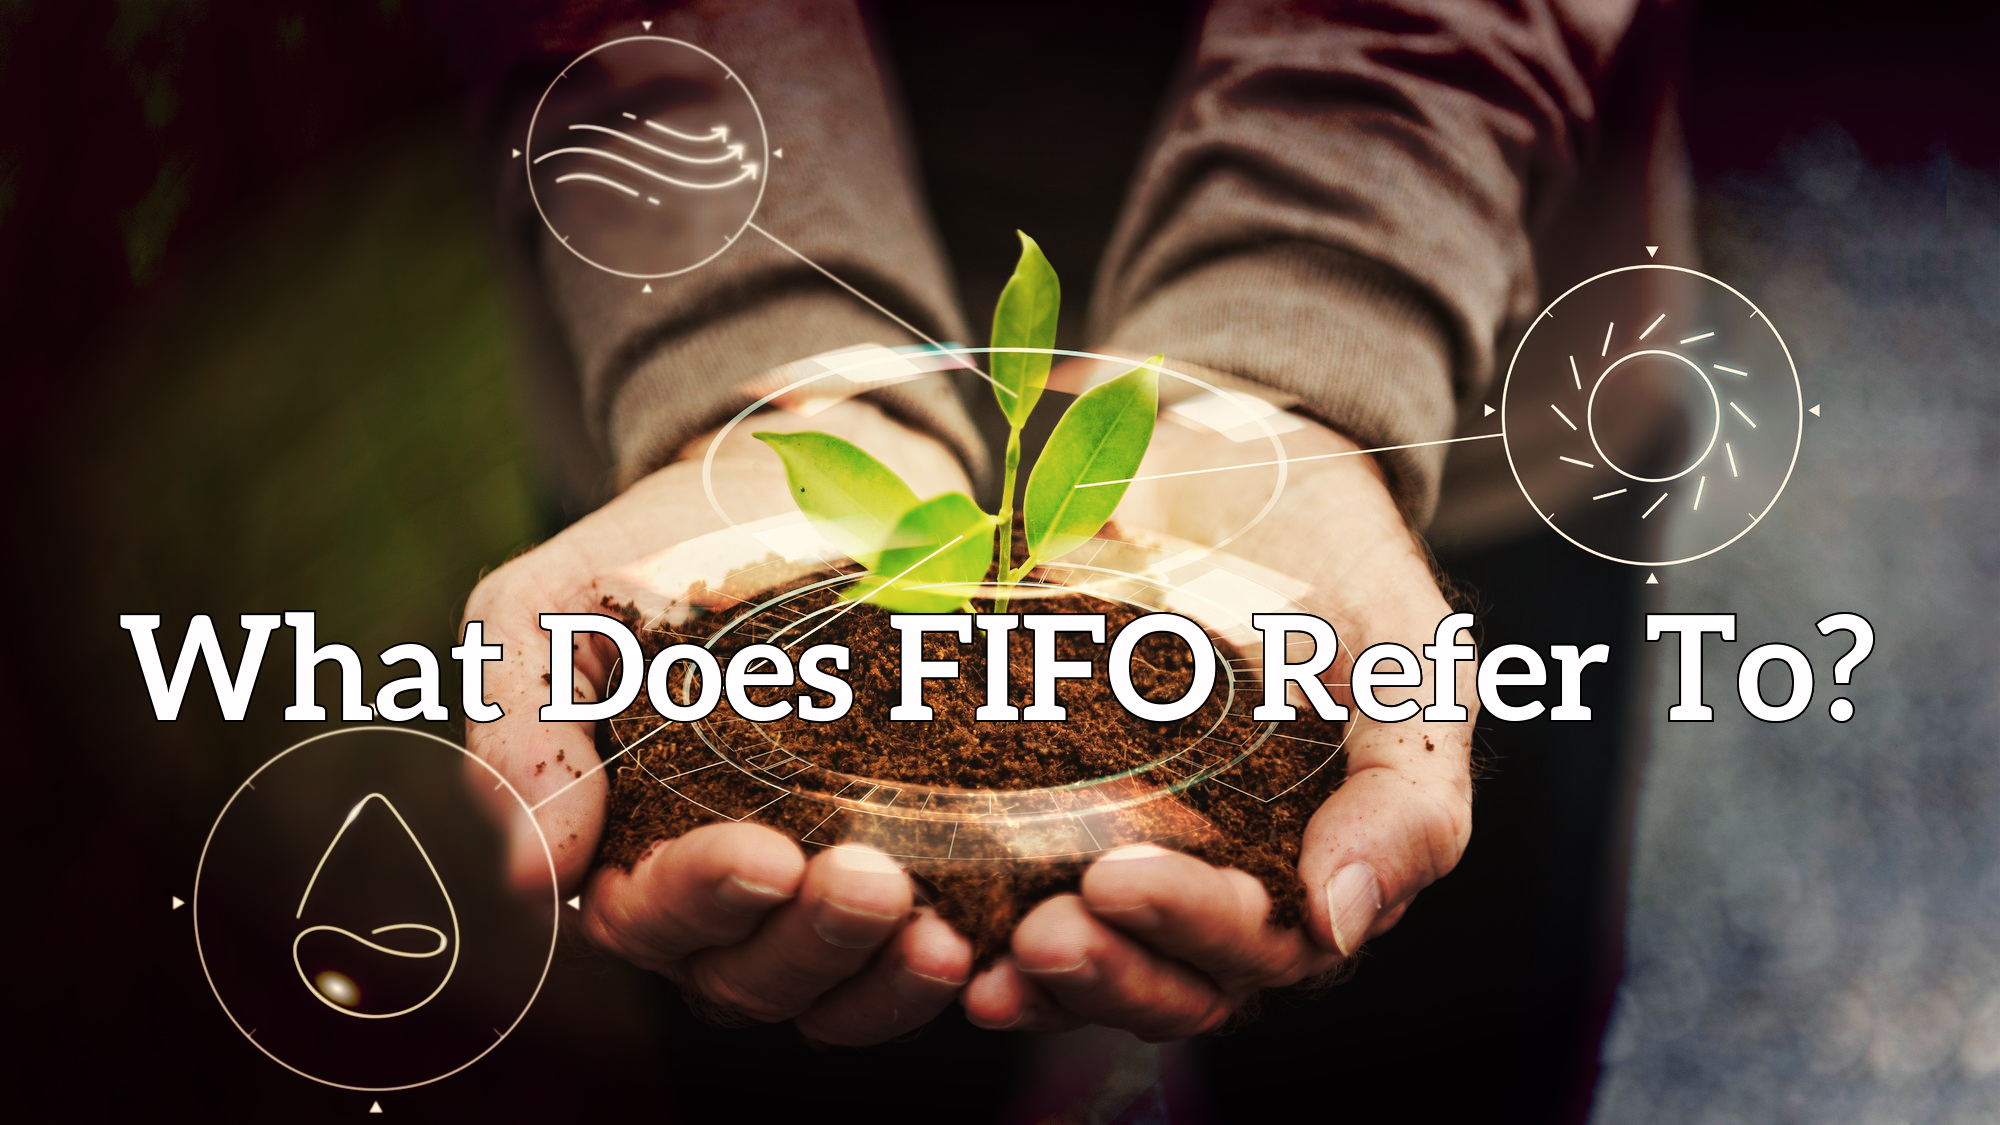 What Does FIFO Refer To in Food Processing